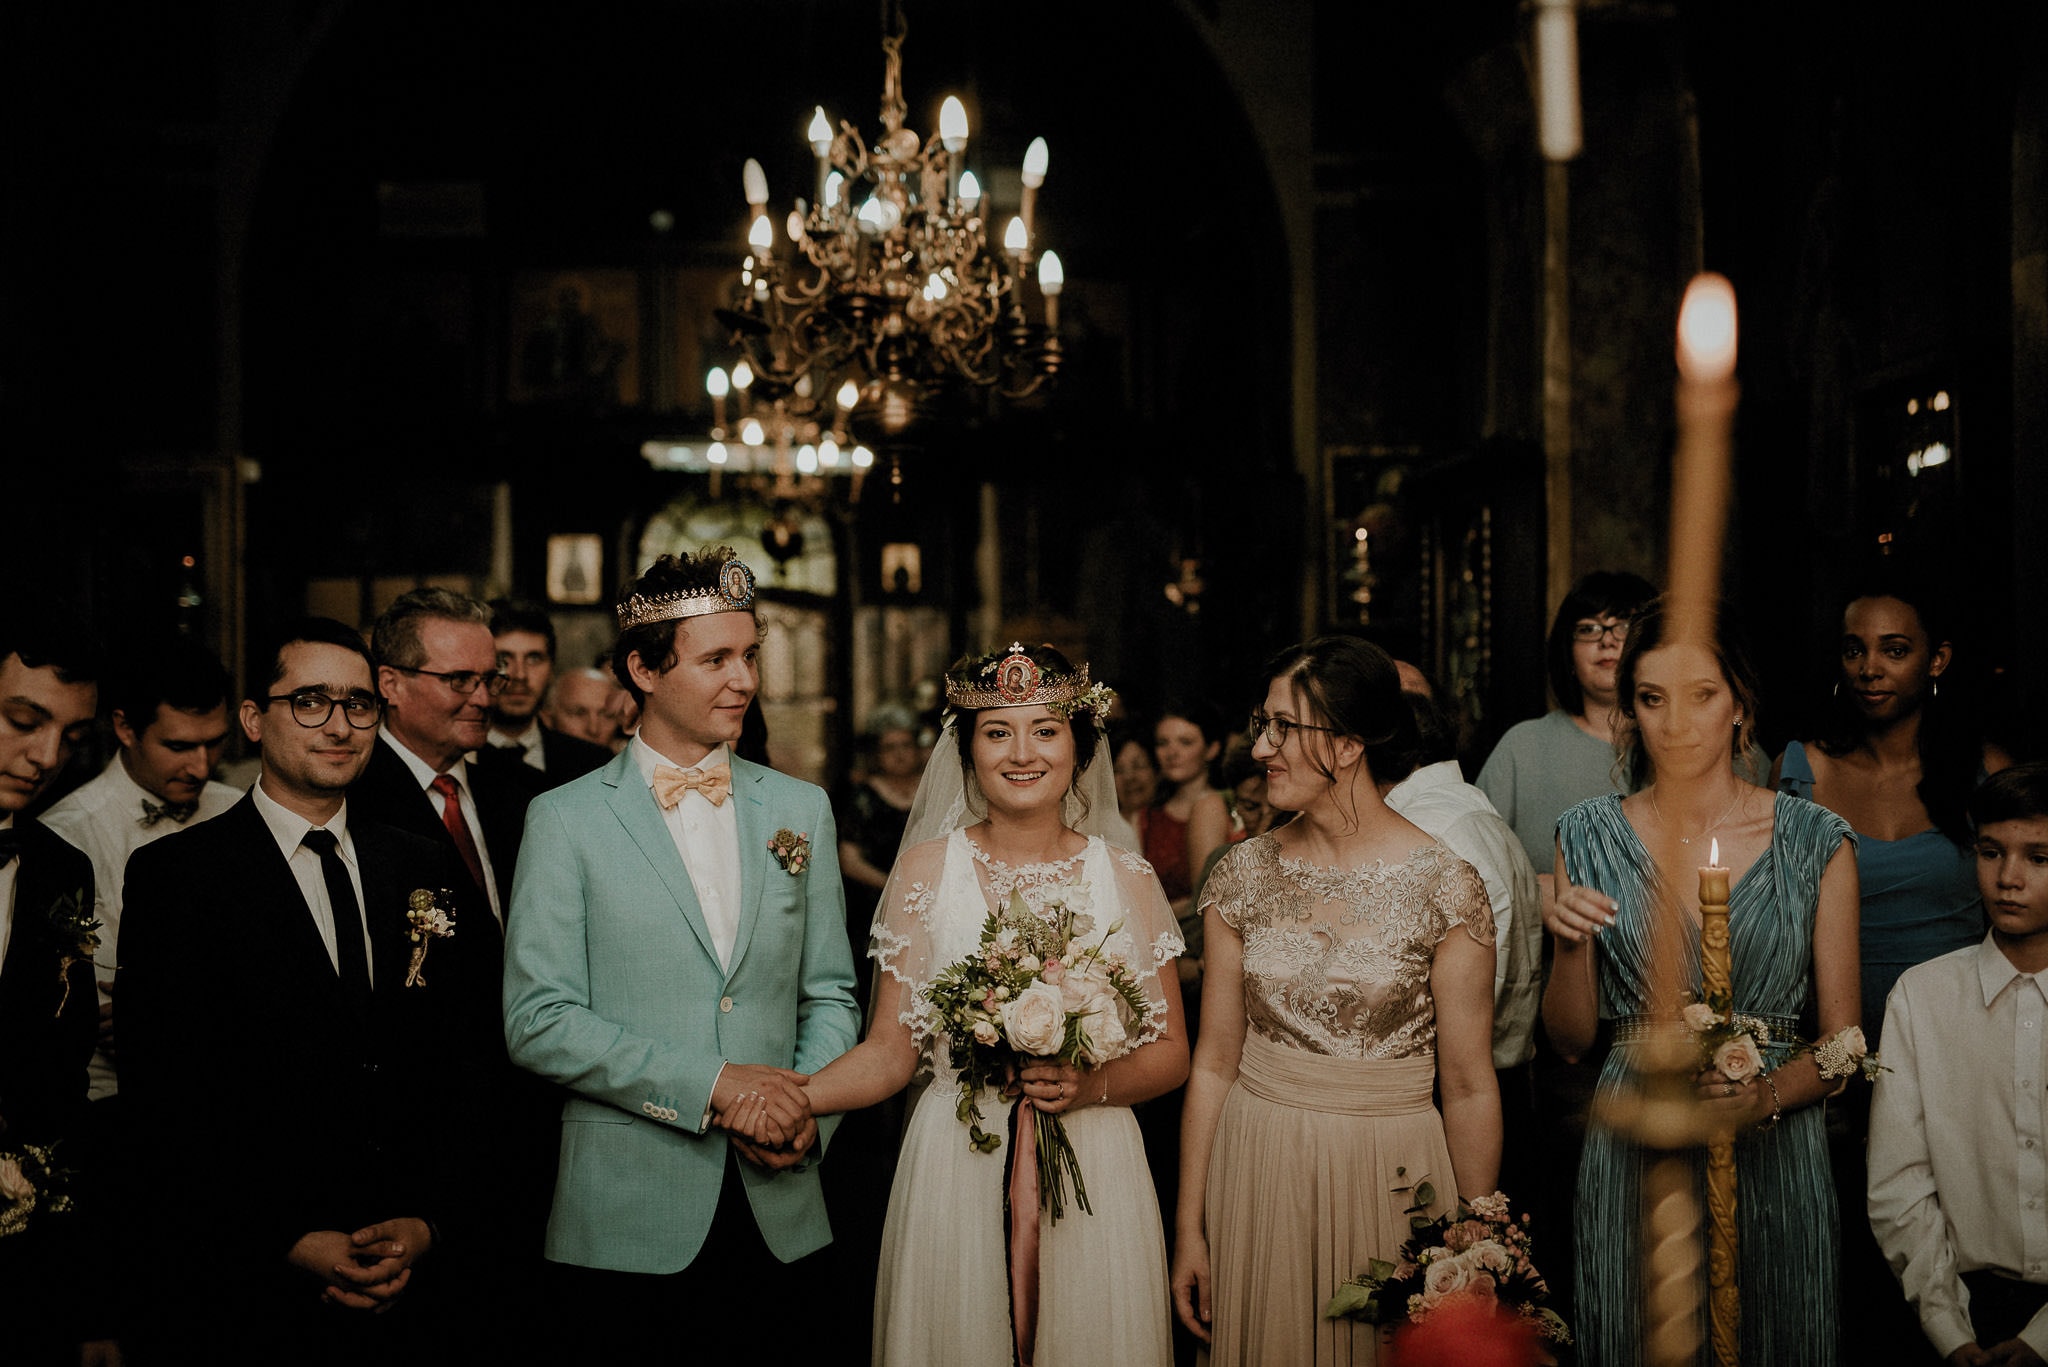 colourful wedding outfits inside an orthodox church